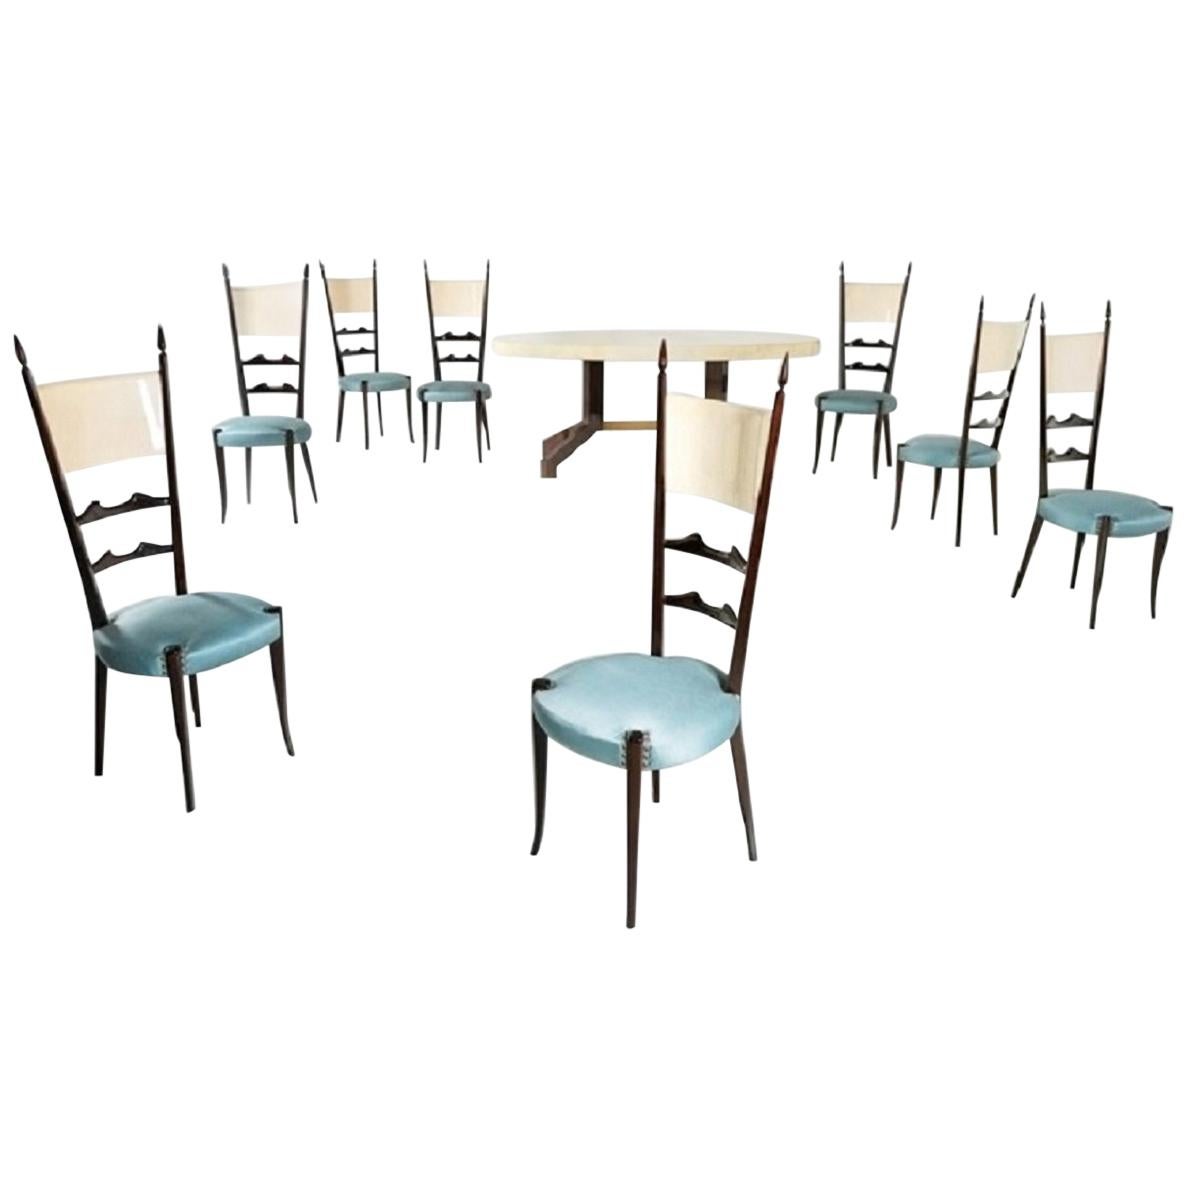 Aldo Tura Parchment Oval Table and Eight Chairs, 1950 -1960